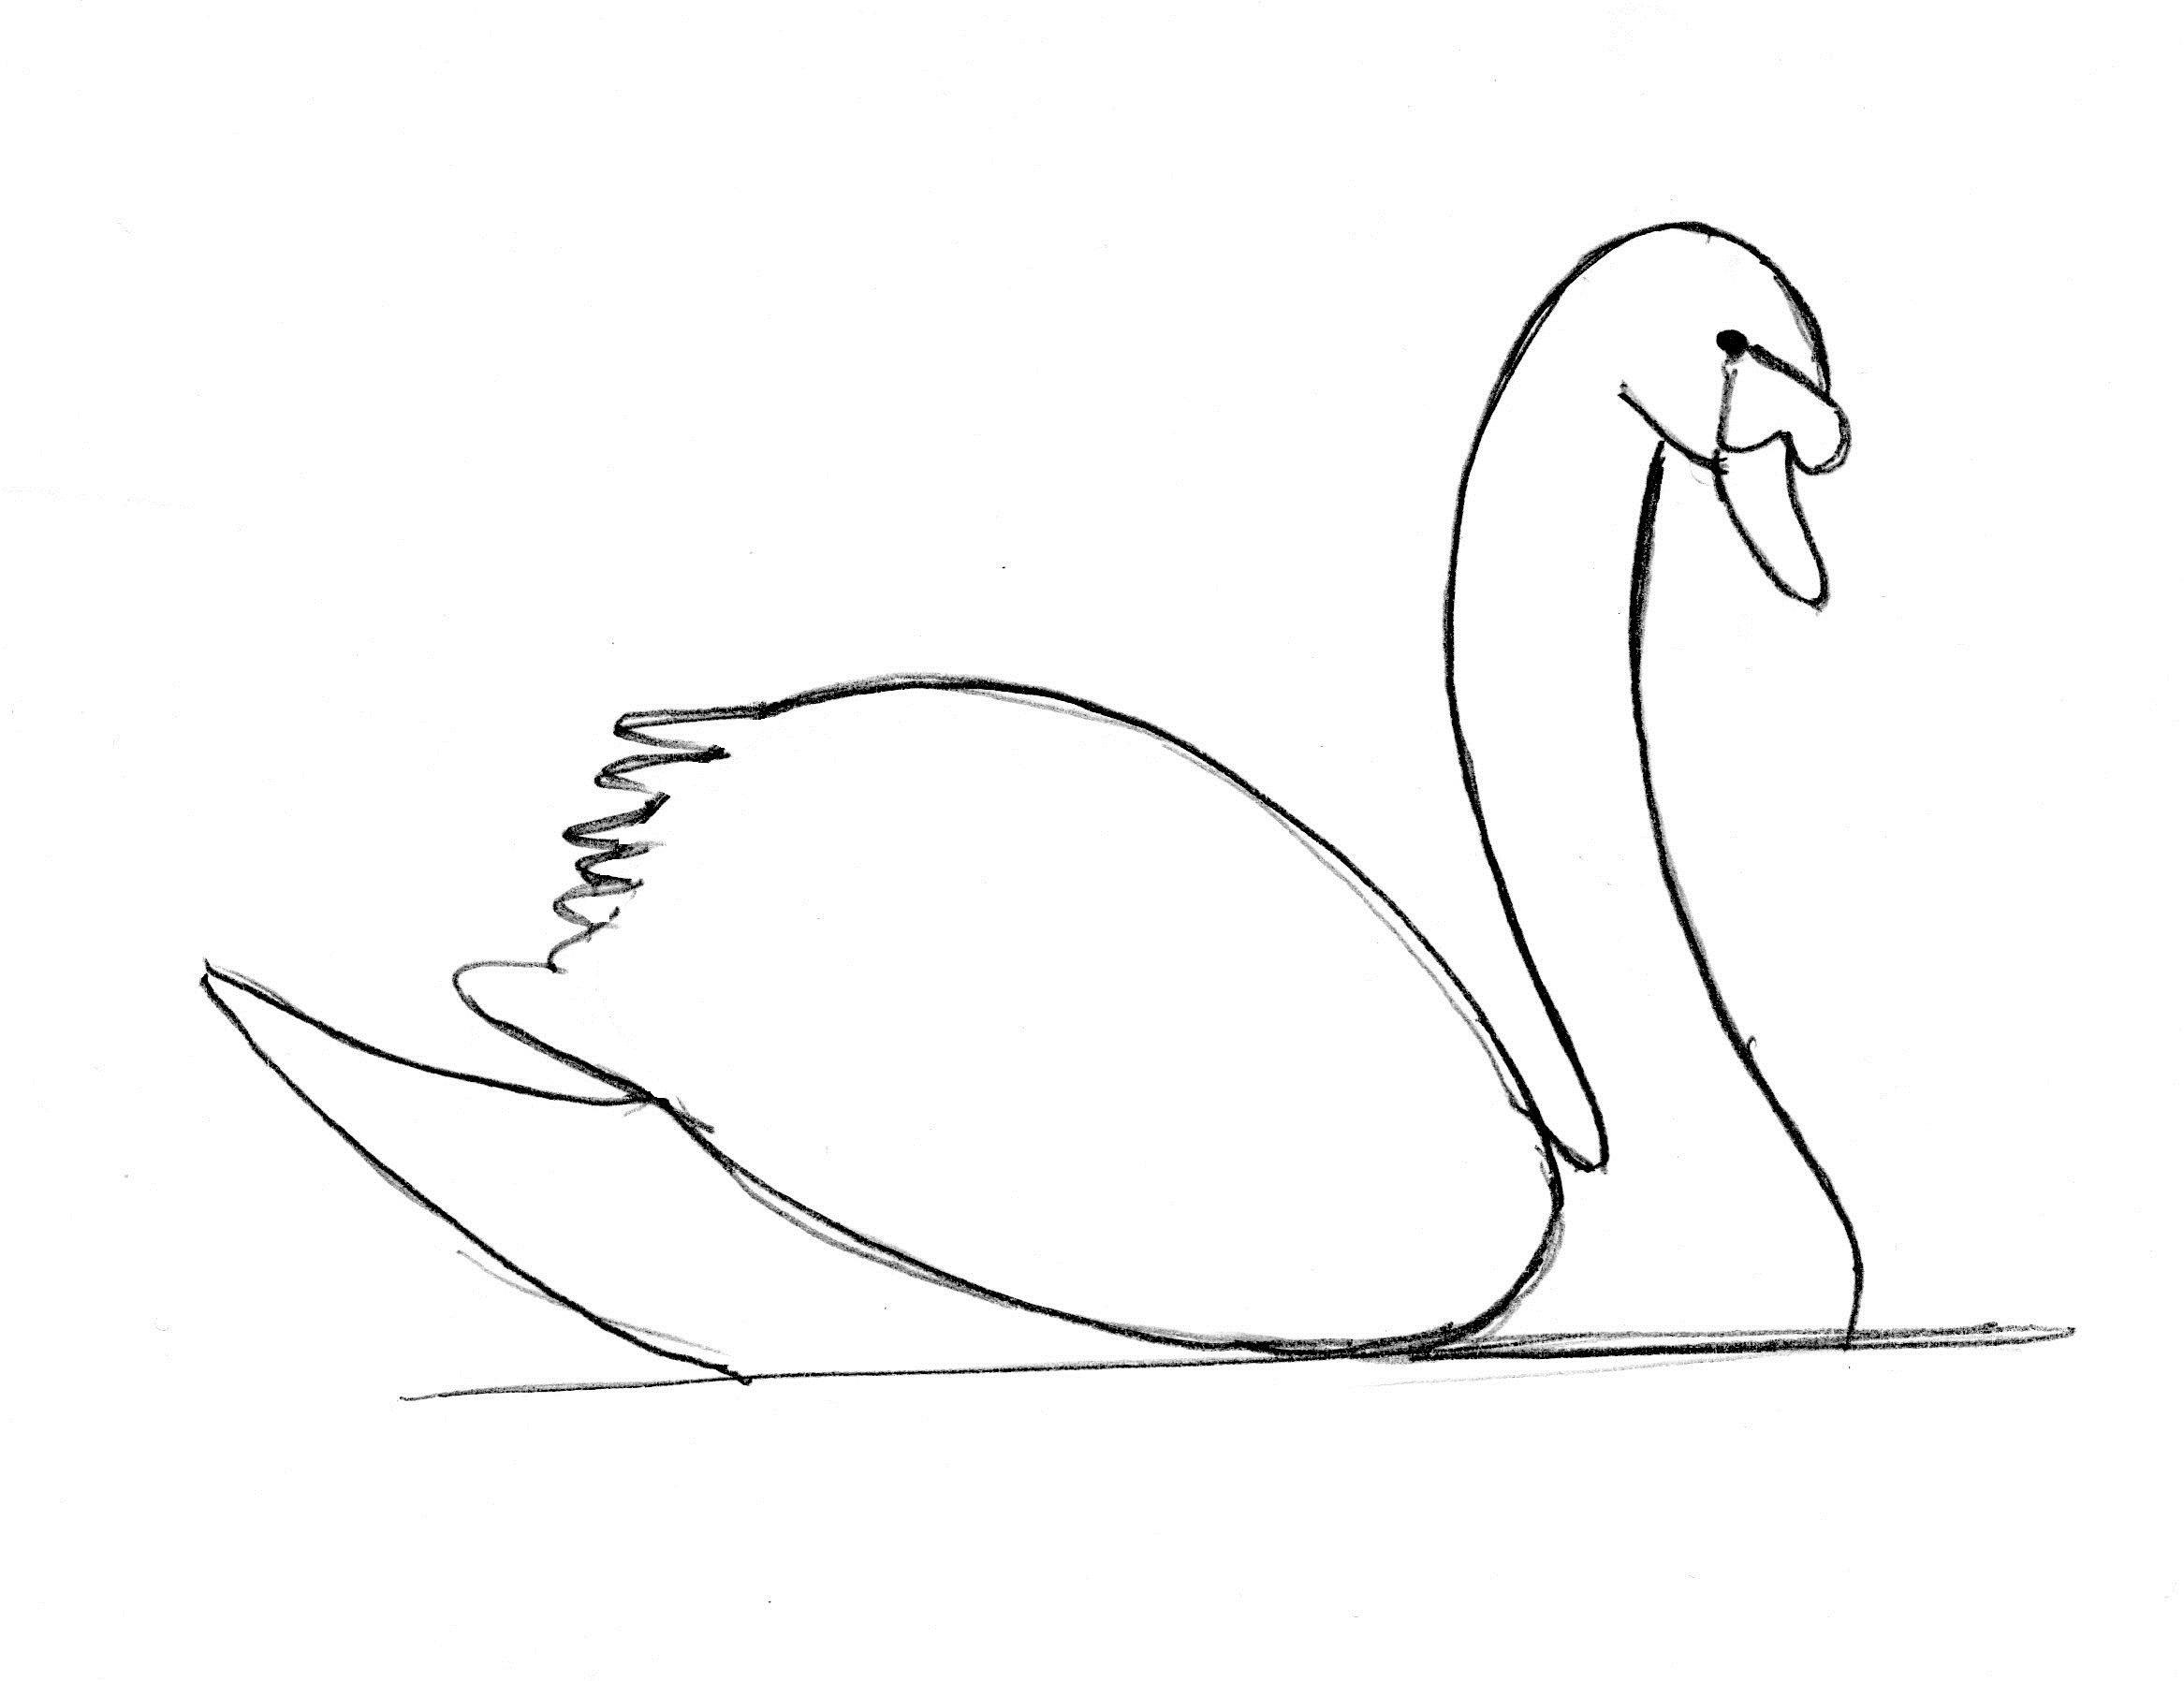  Swan Drawing Step by Step - Samantha Bell